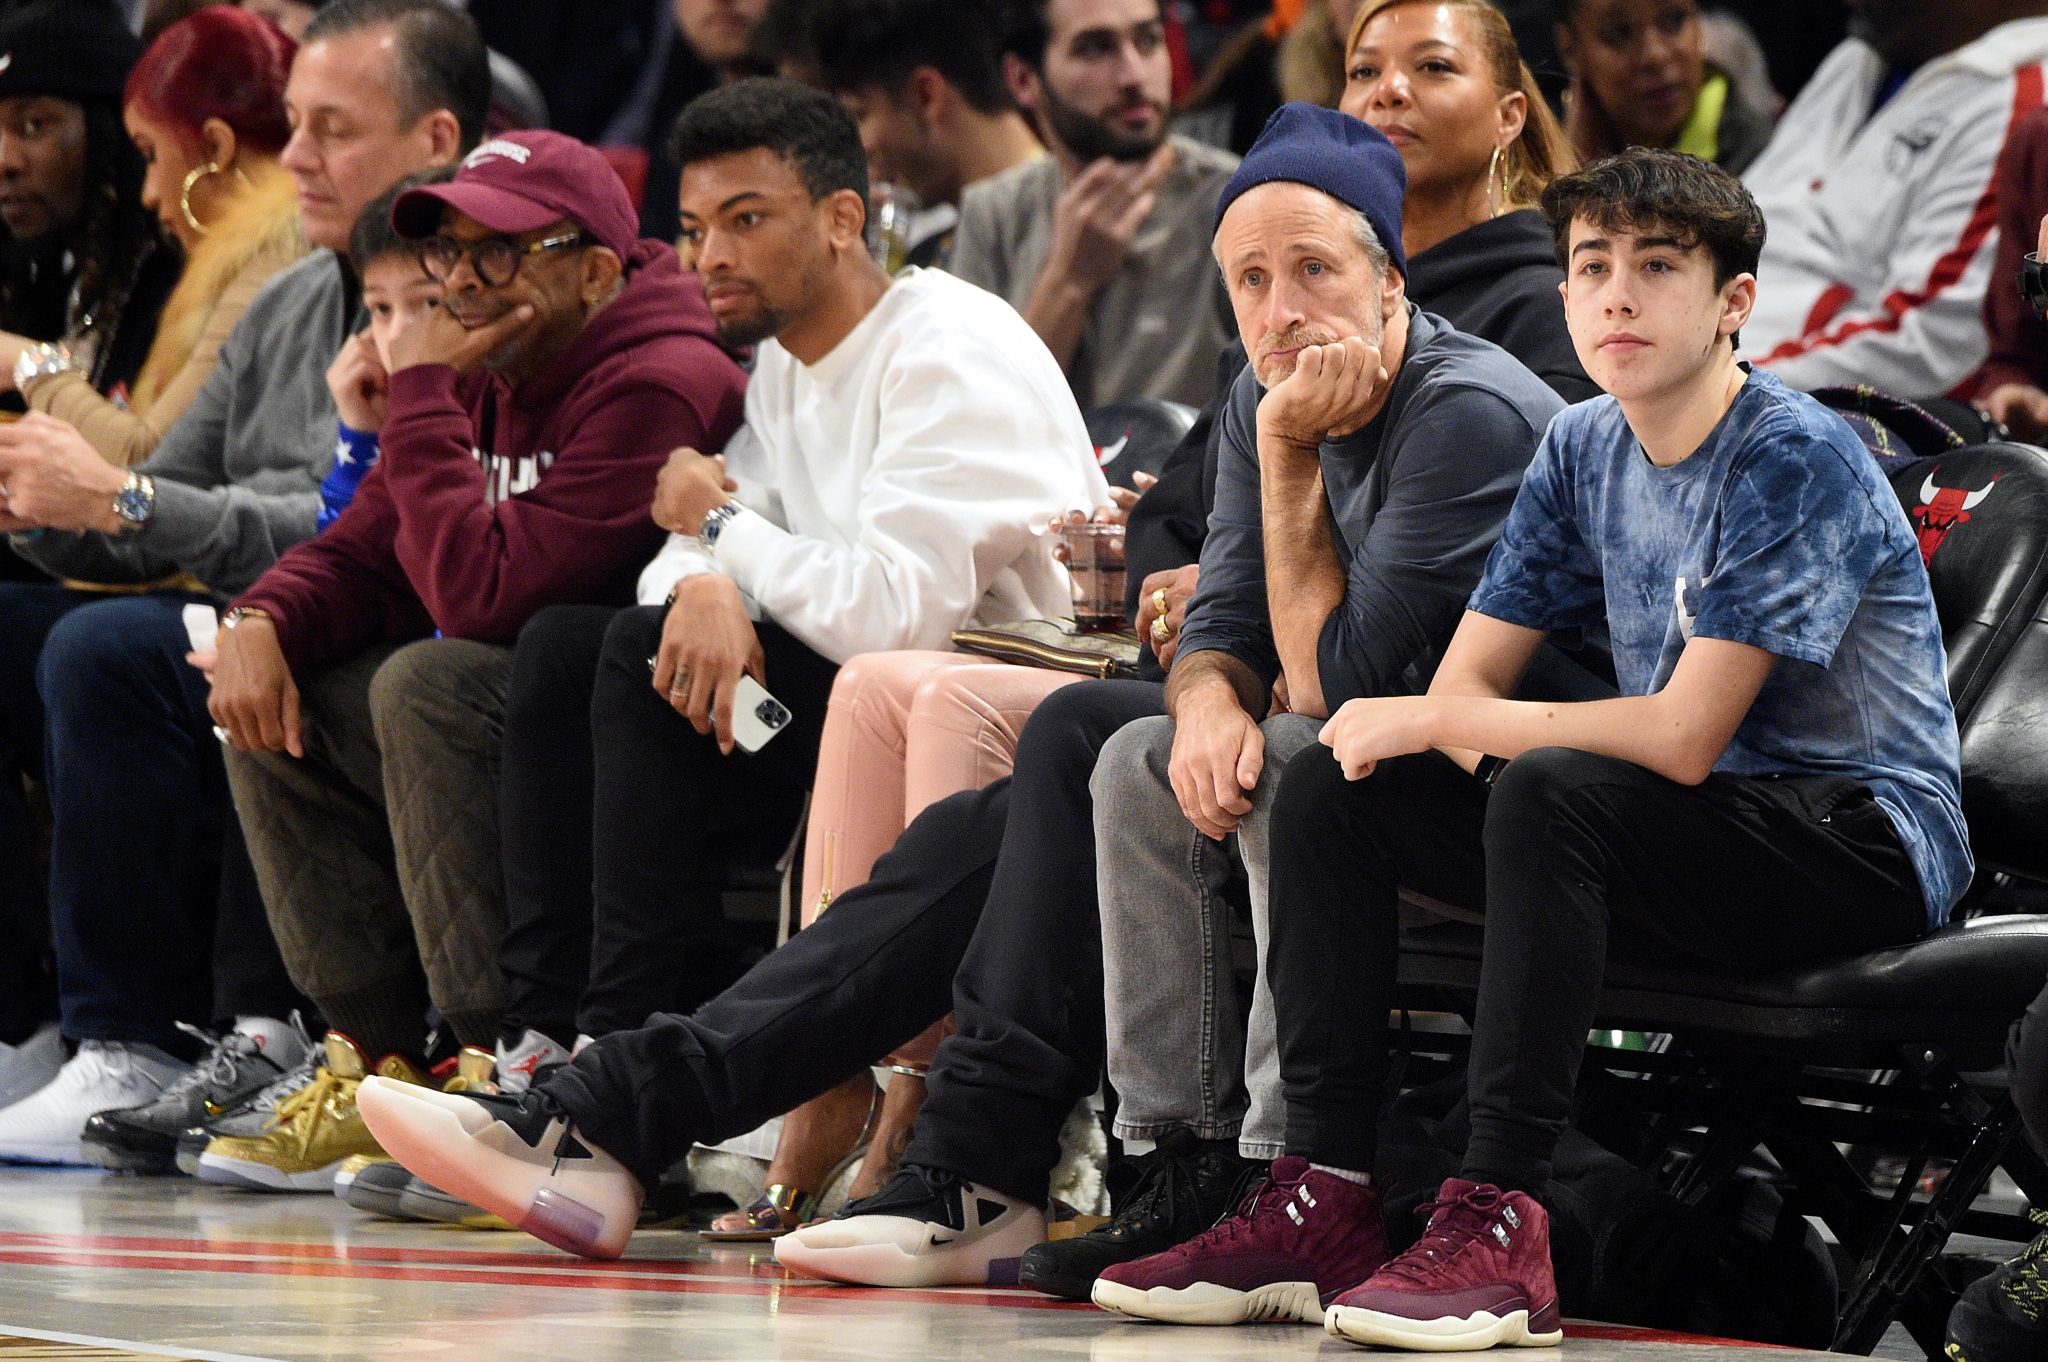 Celebrities sitting courtside at the NBA All-Star Game